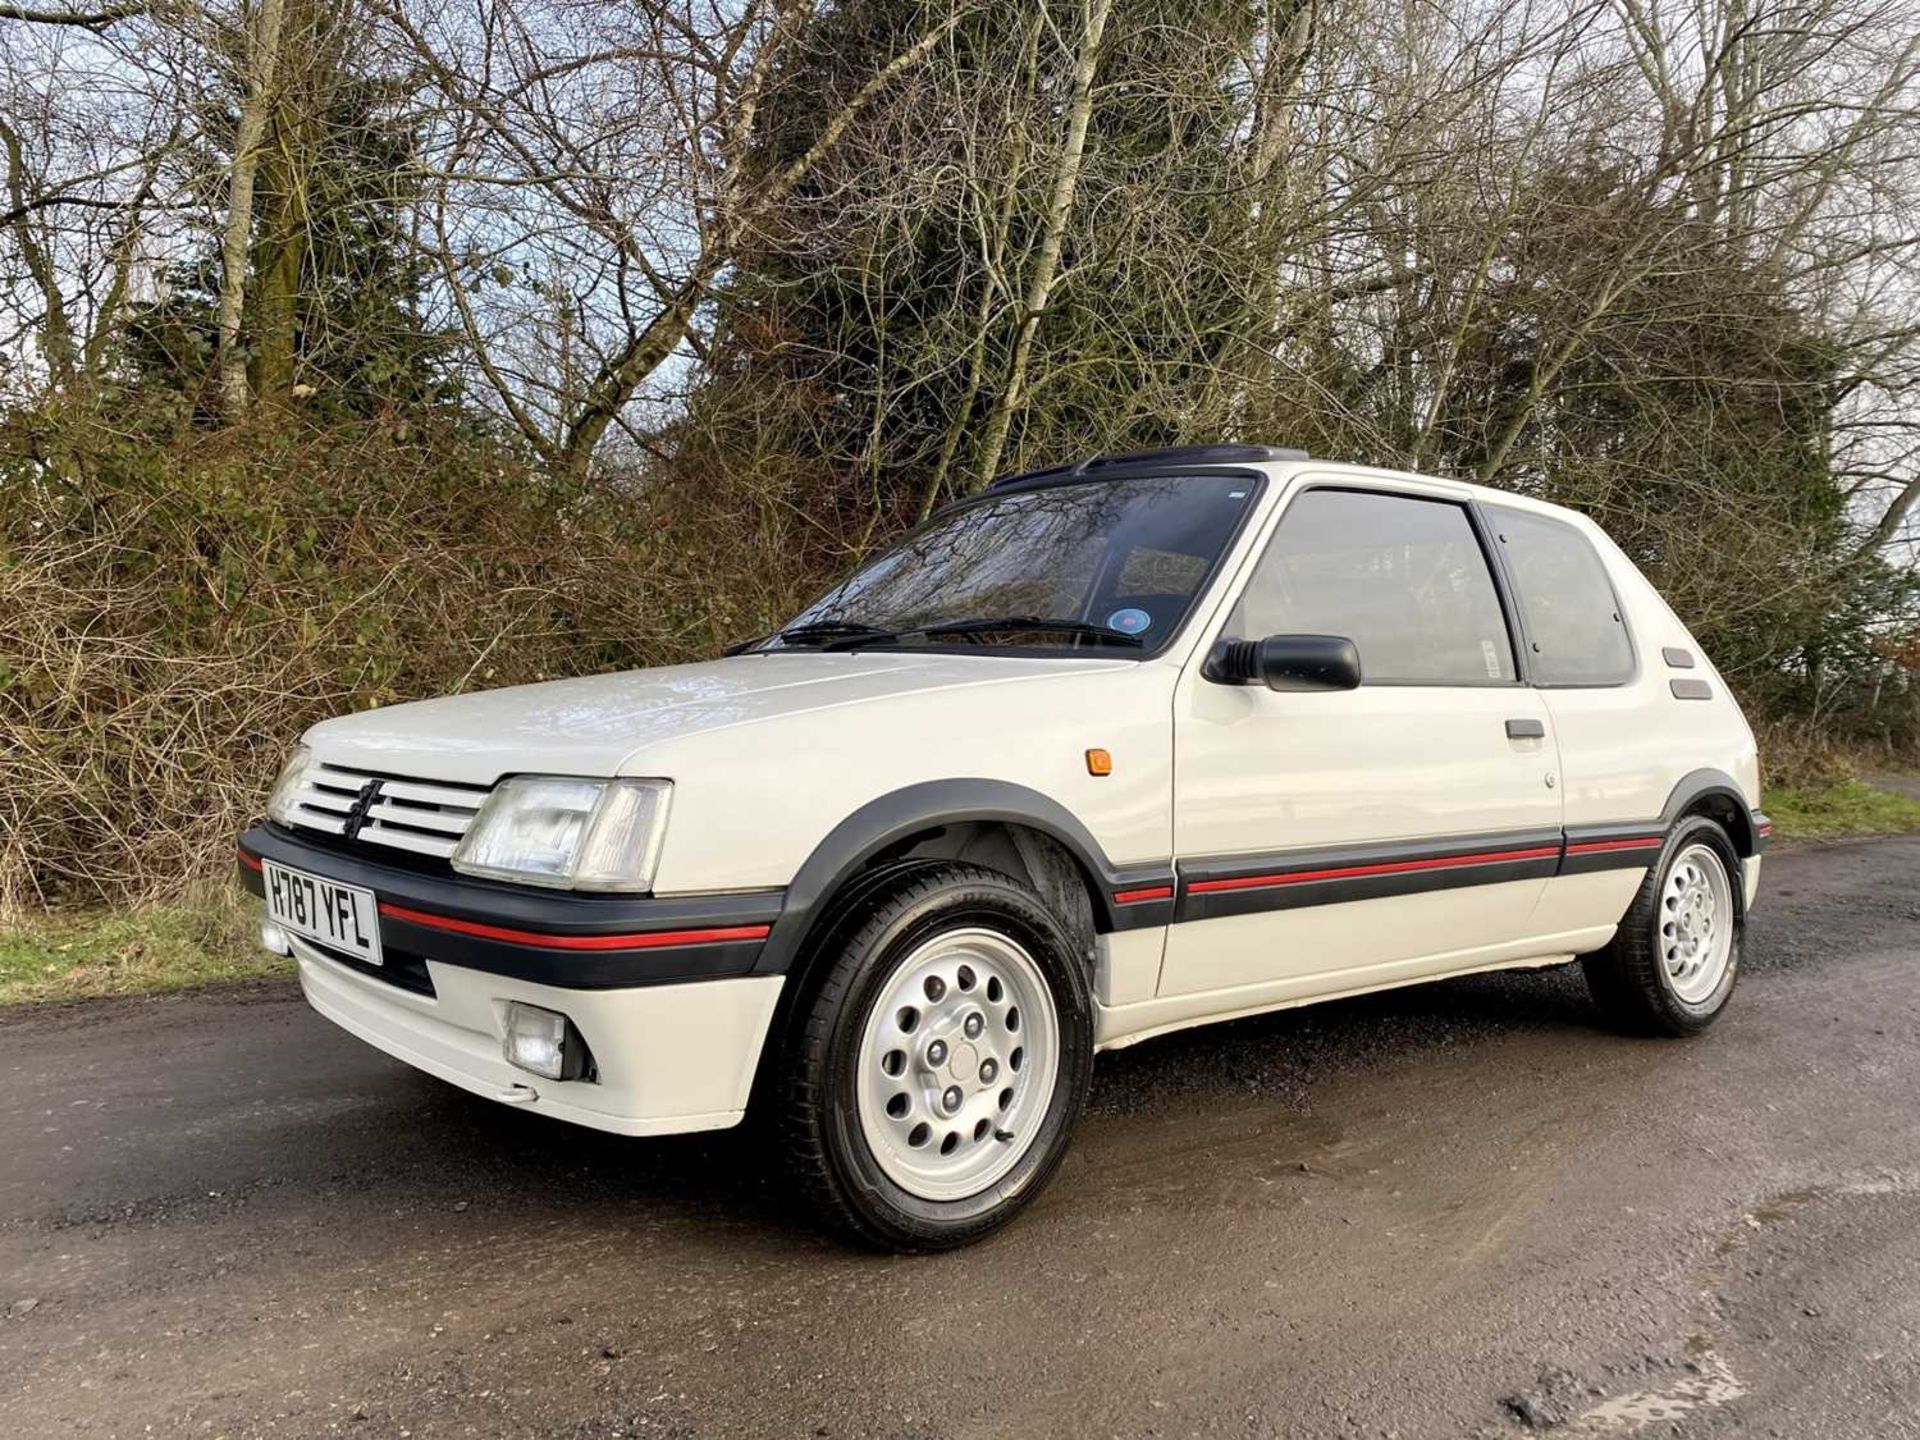 1990 Peugeot 205 GTi 1.6 Only 56,000 miles, same owner for 16 years - Image 4 of 81